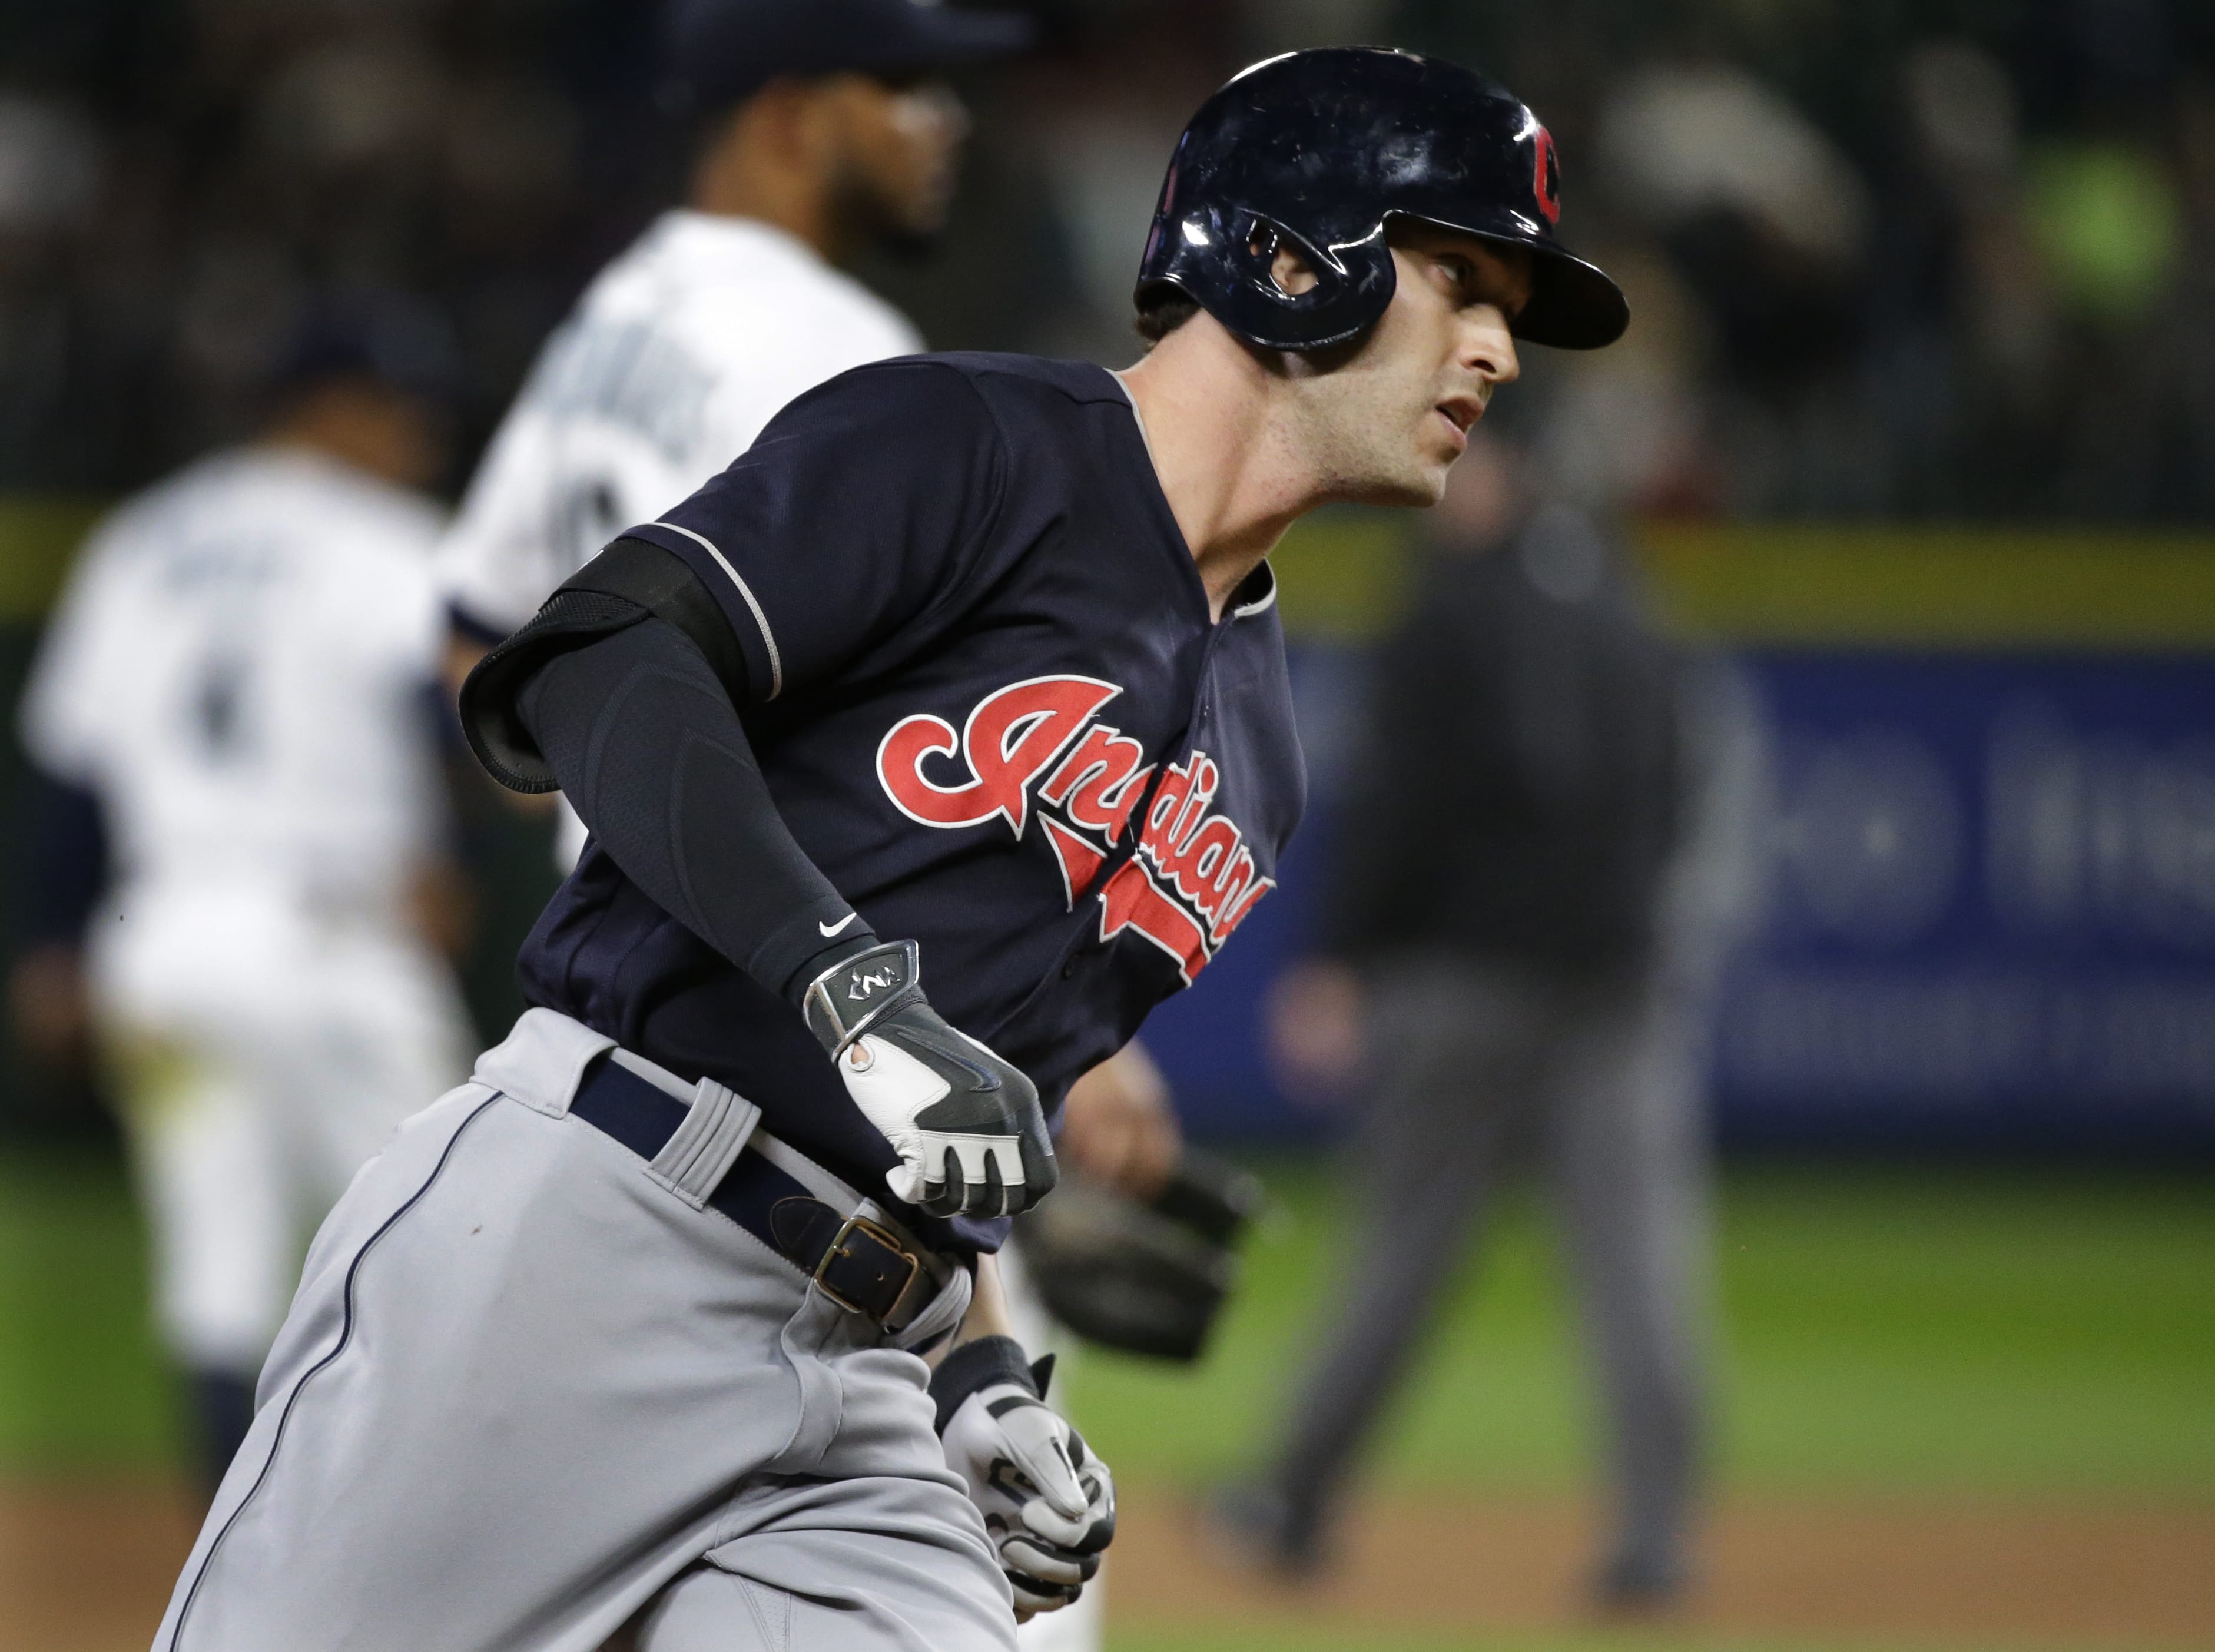 Cleveland Indians' Tyler Naquin rounds the bases after he hit a two-run home run during the eighth inning of a baseball game against the Seattle Mariners, Thursday, June 9, 2016, in Seattle. (AP Photo/Ted S.